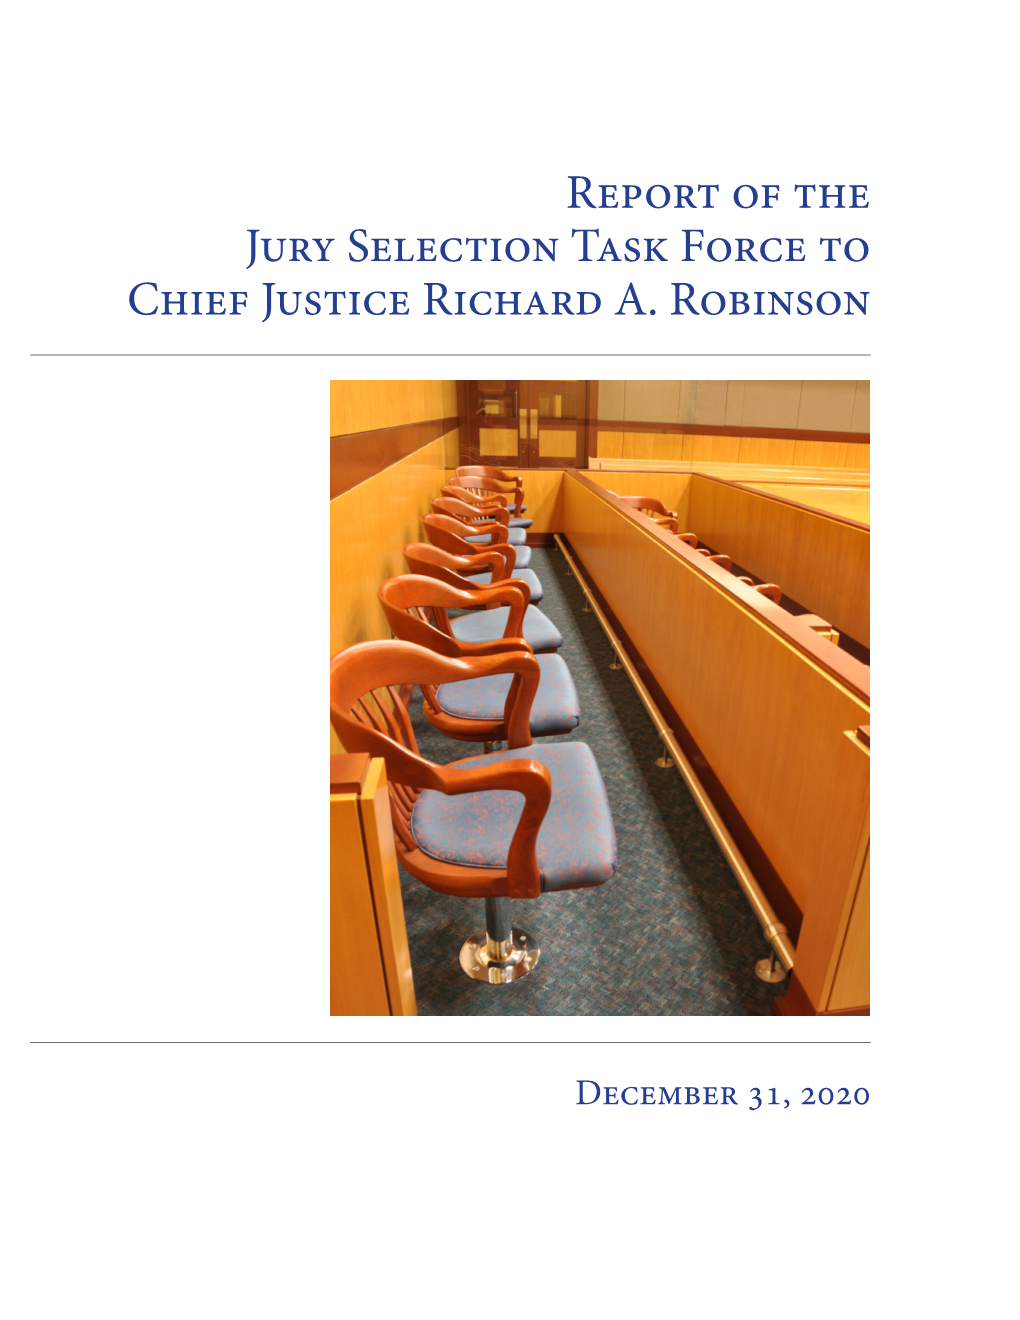 Report of the Jury Selection Task Force to Chief Justice Richard A